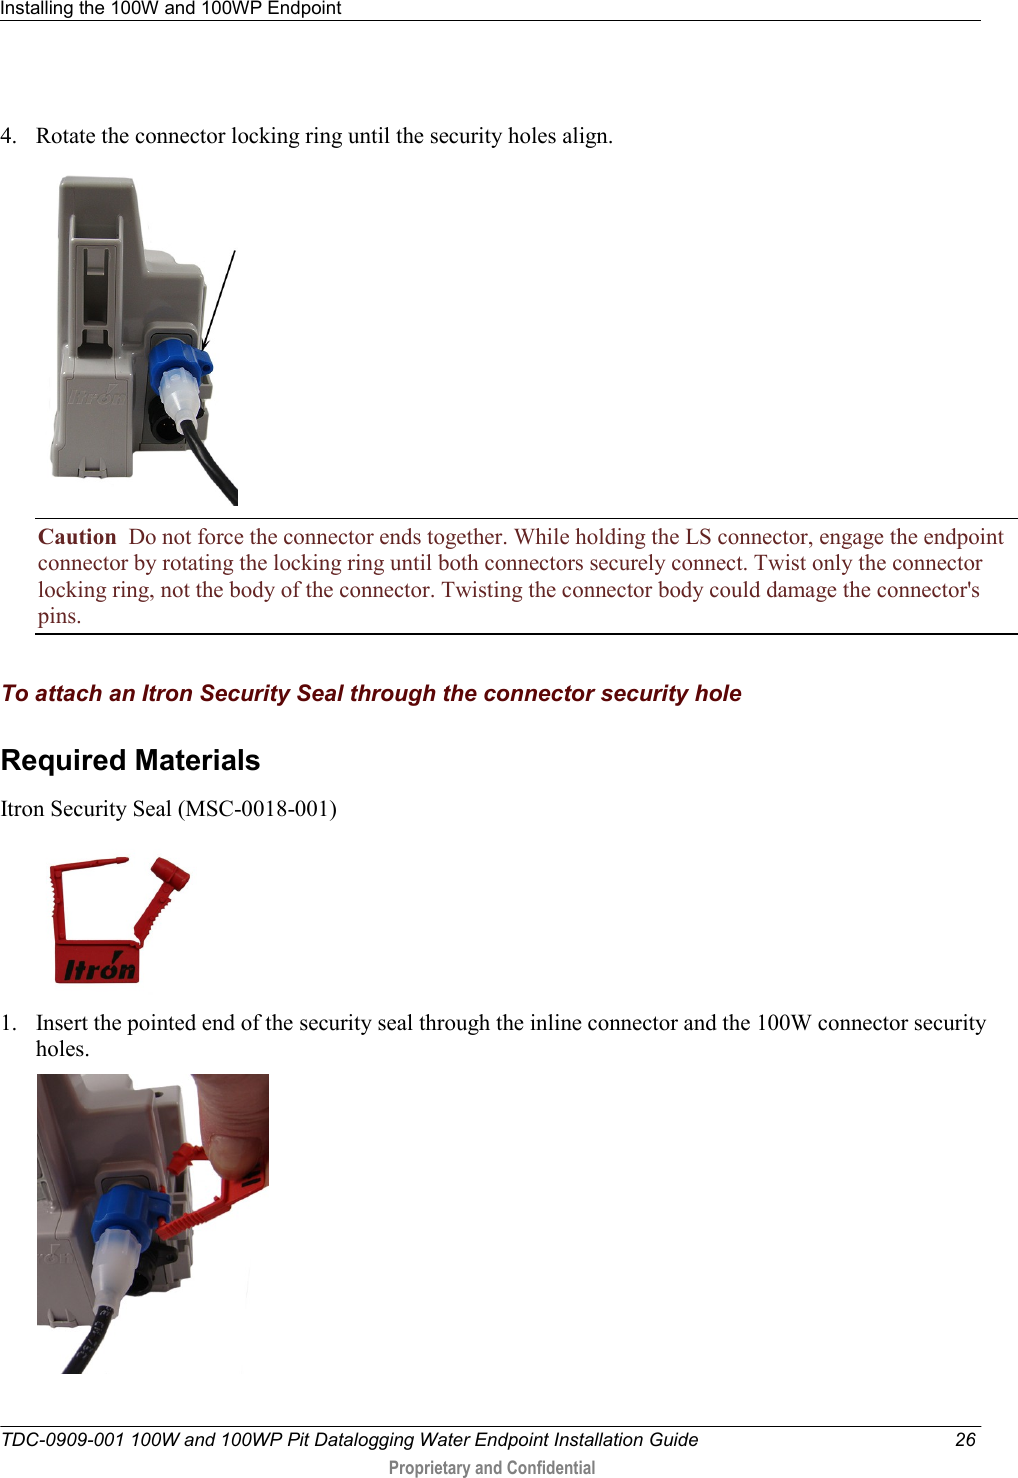 Installing the 100W and 100WP Endpoint   TDC-0909-001 100W and 100WP Pit Datalogging Water Endpoint Installation Guide  26  Proprietary and Confidential            4. Rotate the connector locking ring until the security holes align.   Caution  Do not force the connector ends together. While holding the LS connector, engage the endpoint connector by rotating the locking ring until both connectors securely connect. Twist only the connector locking ring, not the body of the connector. Twisting the connector body could damage the connector&apos;s pins.   To attach an Itron Security Seal through the connector security hole Required Materials  Itron Security Seal (MSC-0018-001)  1. Insert the pointed end of the security seal through the inline connector and the 100W connector security holes.  